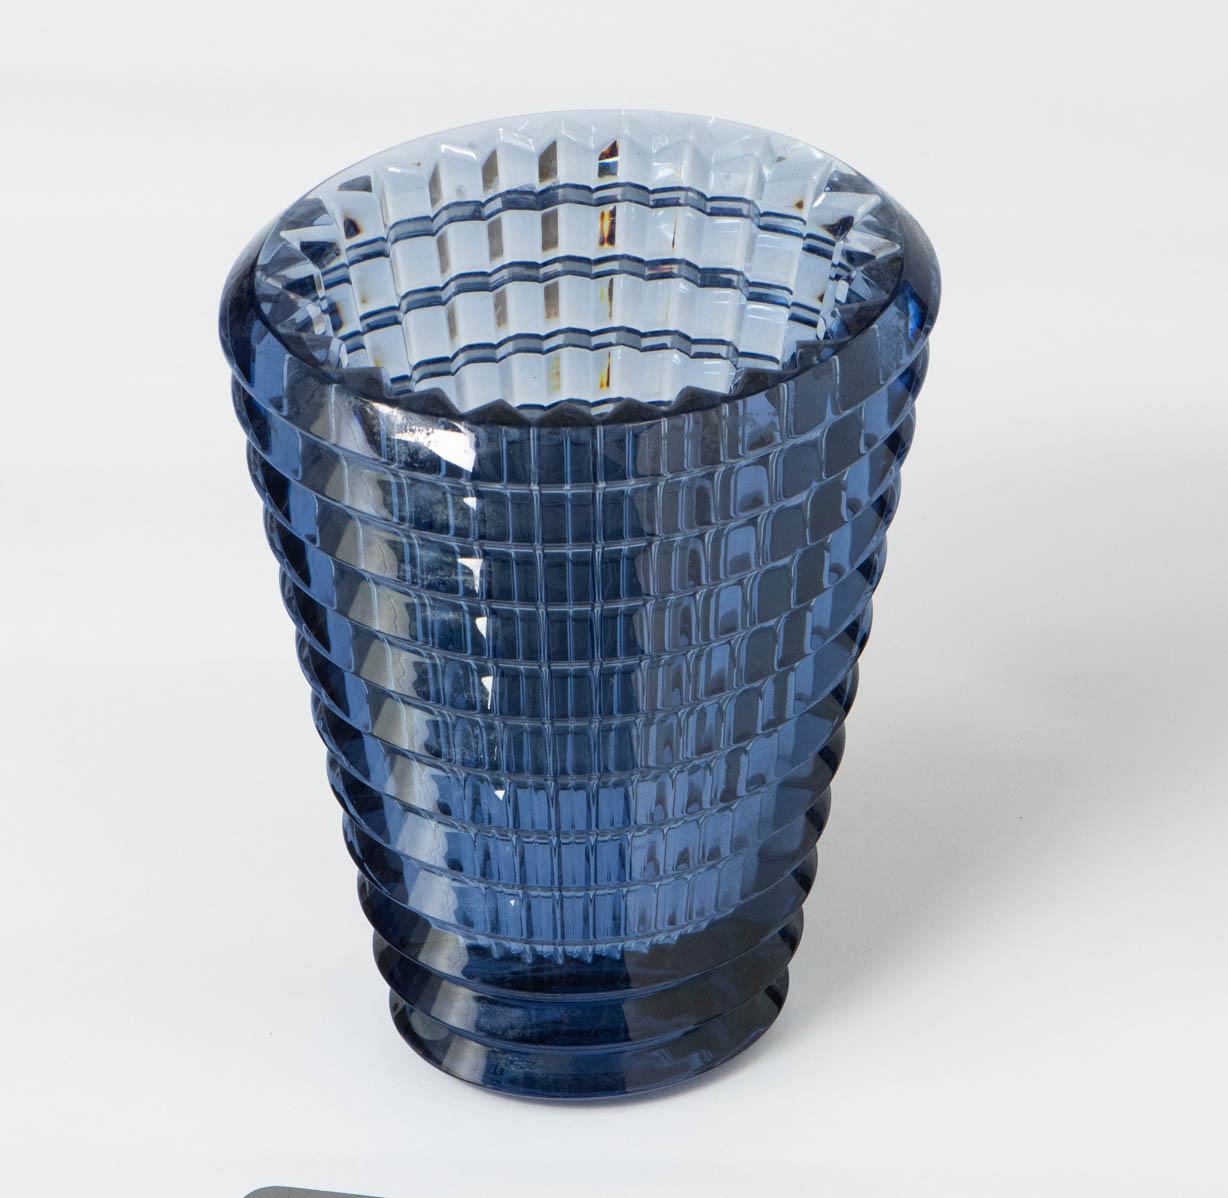 A Baccarat blue glass vase of oval shape
Of tapering geometric form with geometric horizontal and vertical bands.
France,
circa 1930
Signed to underside.

Dimension: 24 cm high x 17.5 cm wide x 14.5 cm deep.